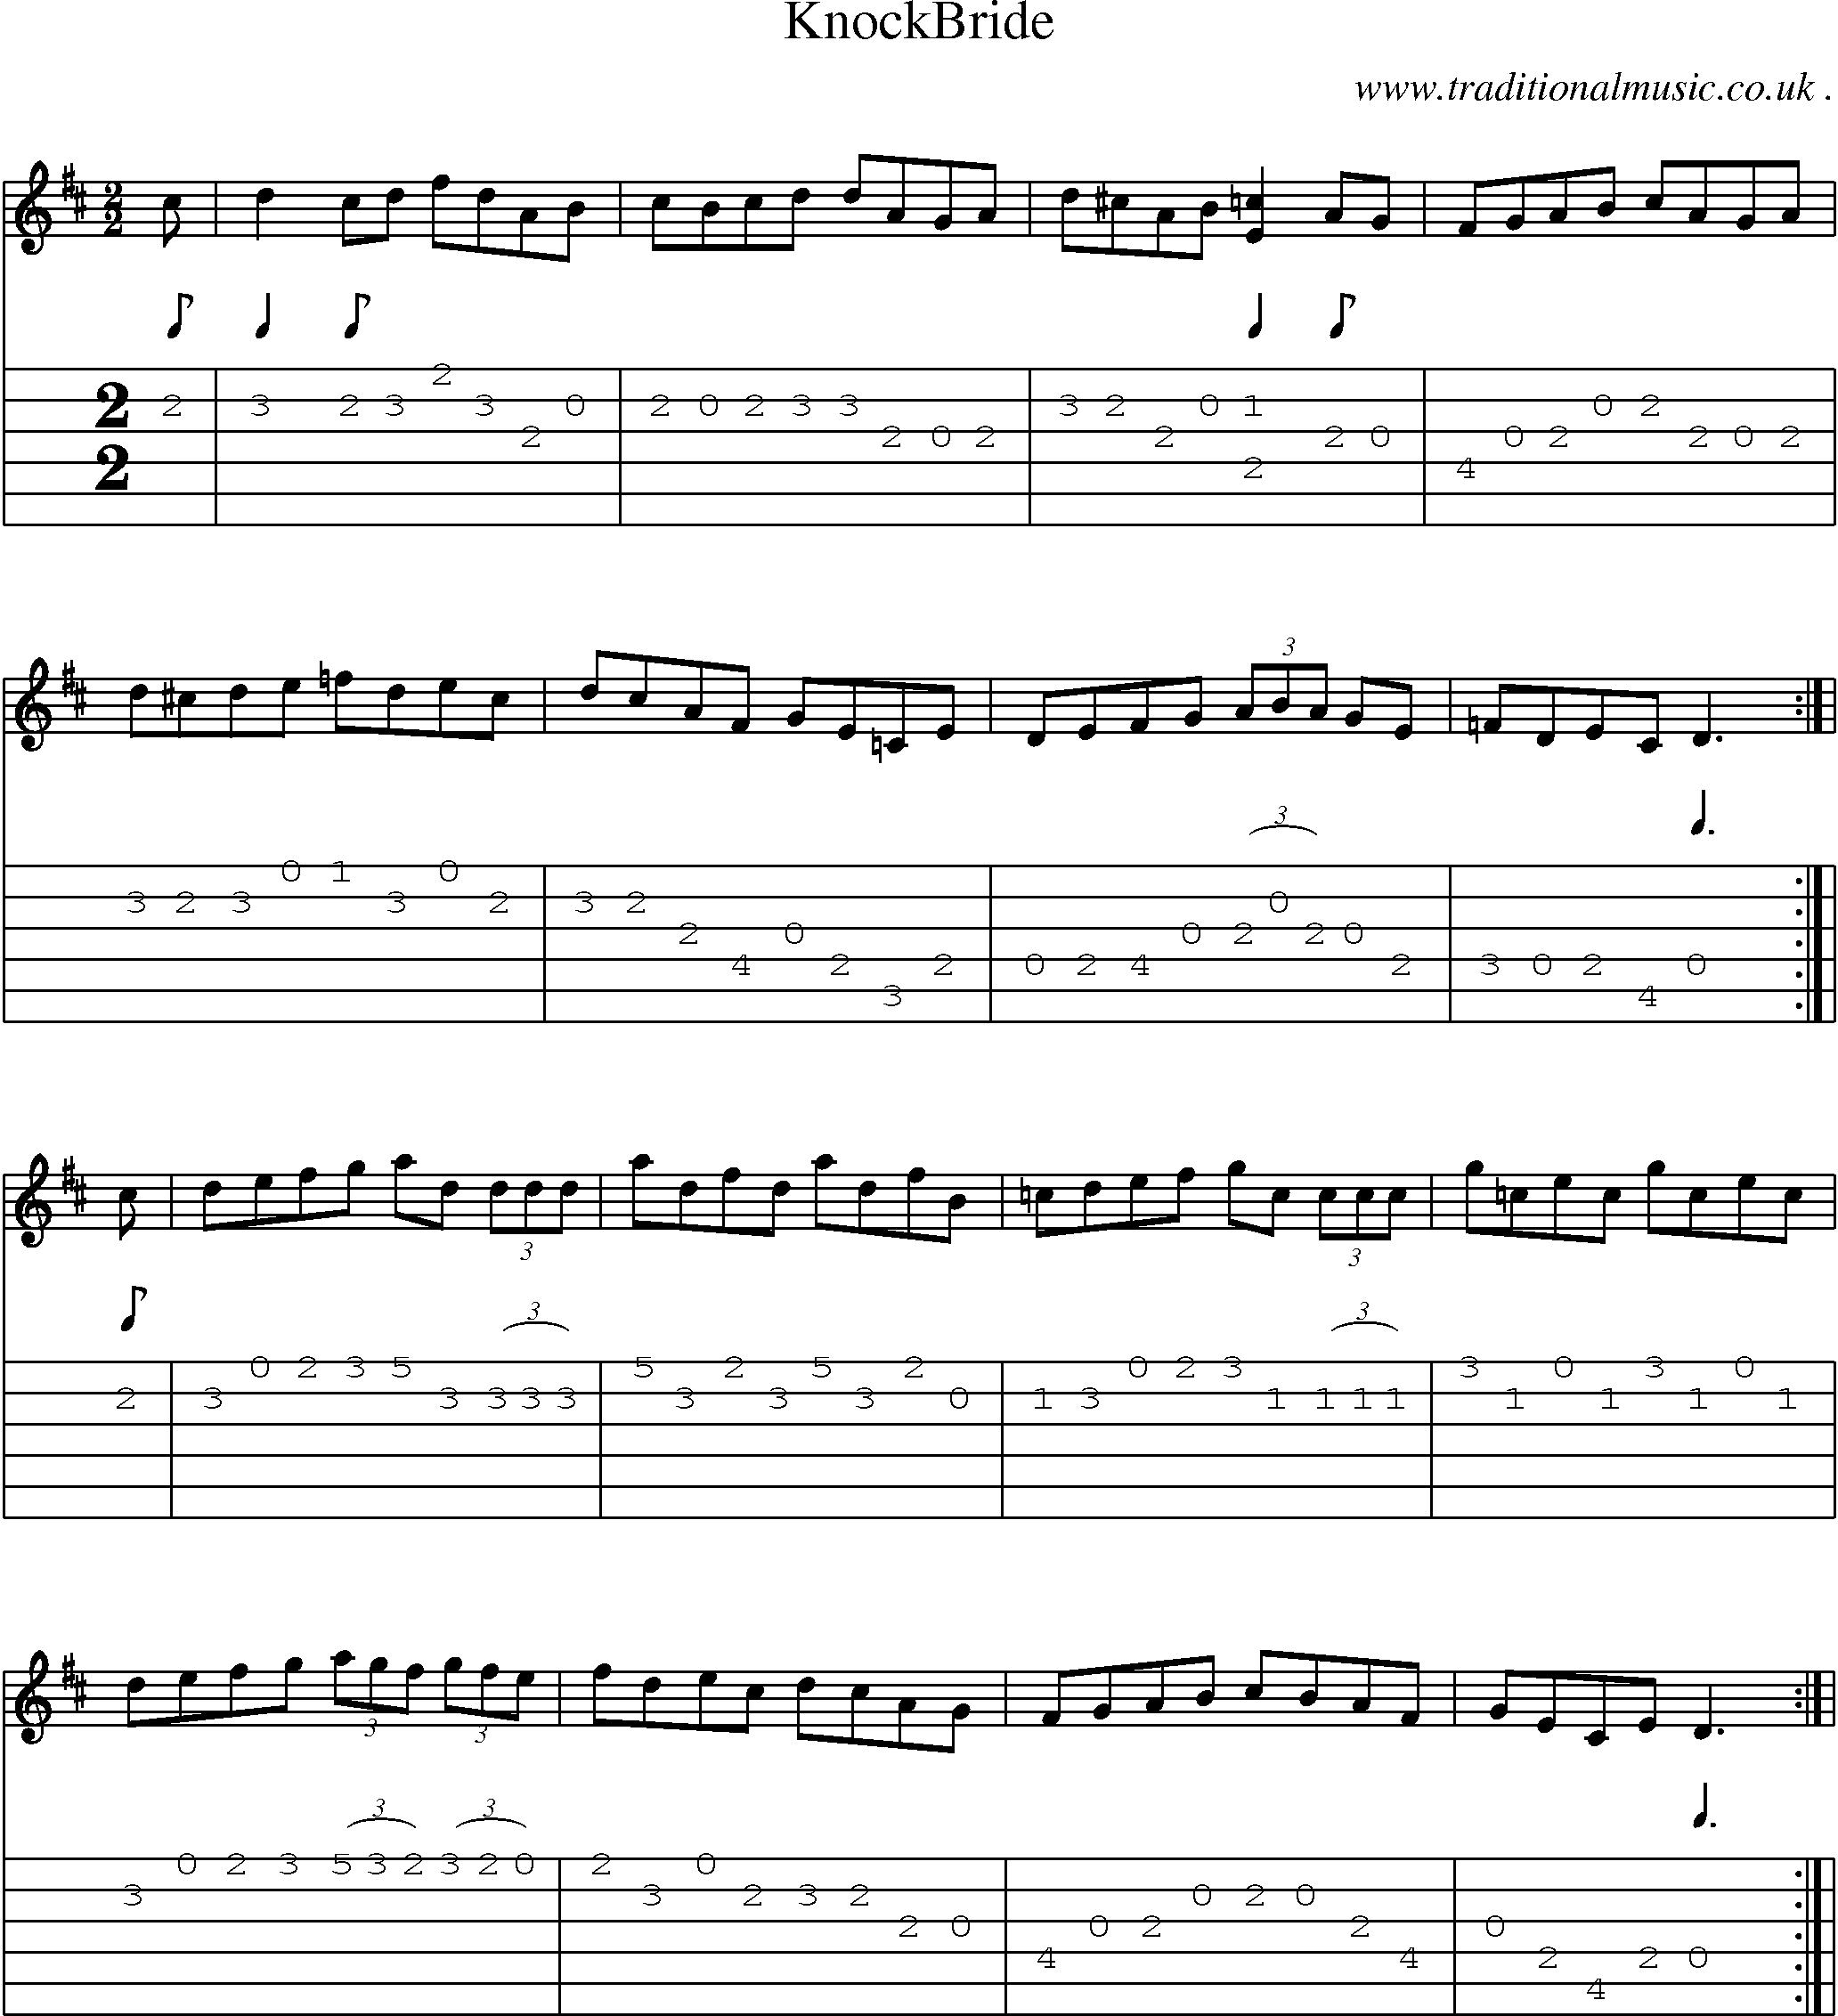 Sheet-Music and Guitar Tabs for Knockbride